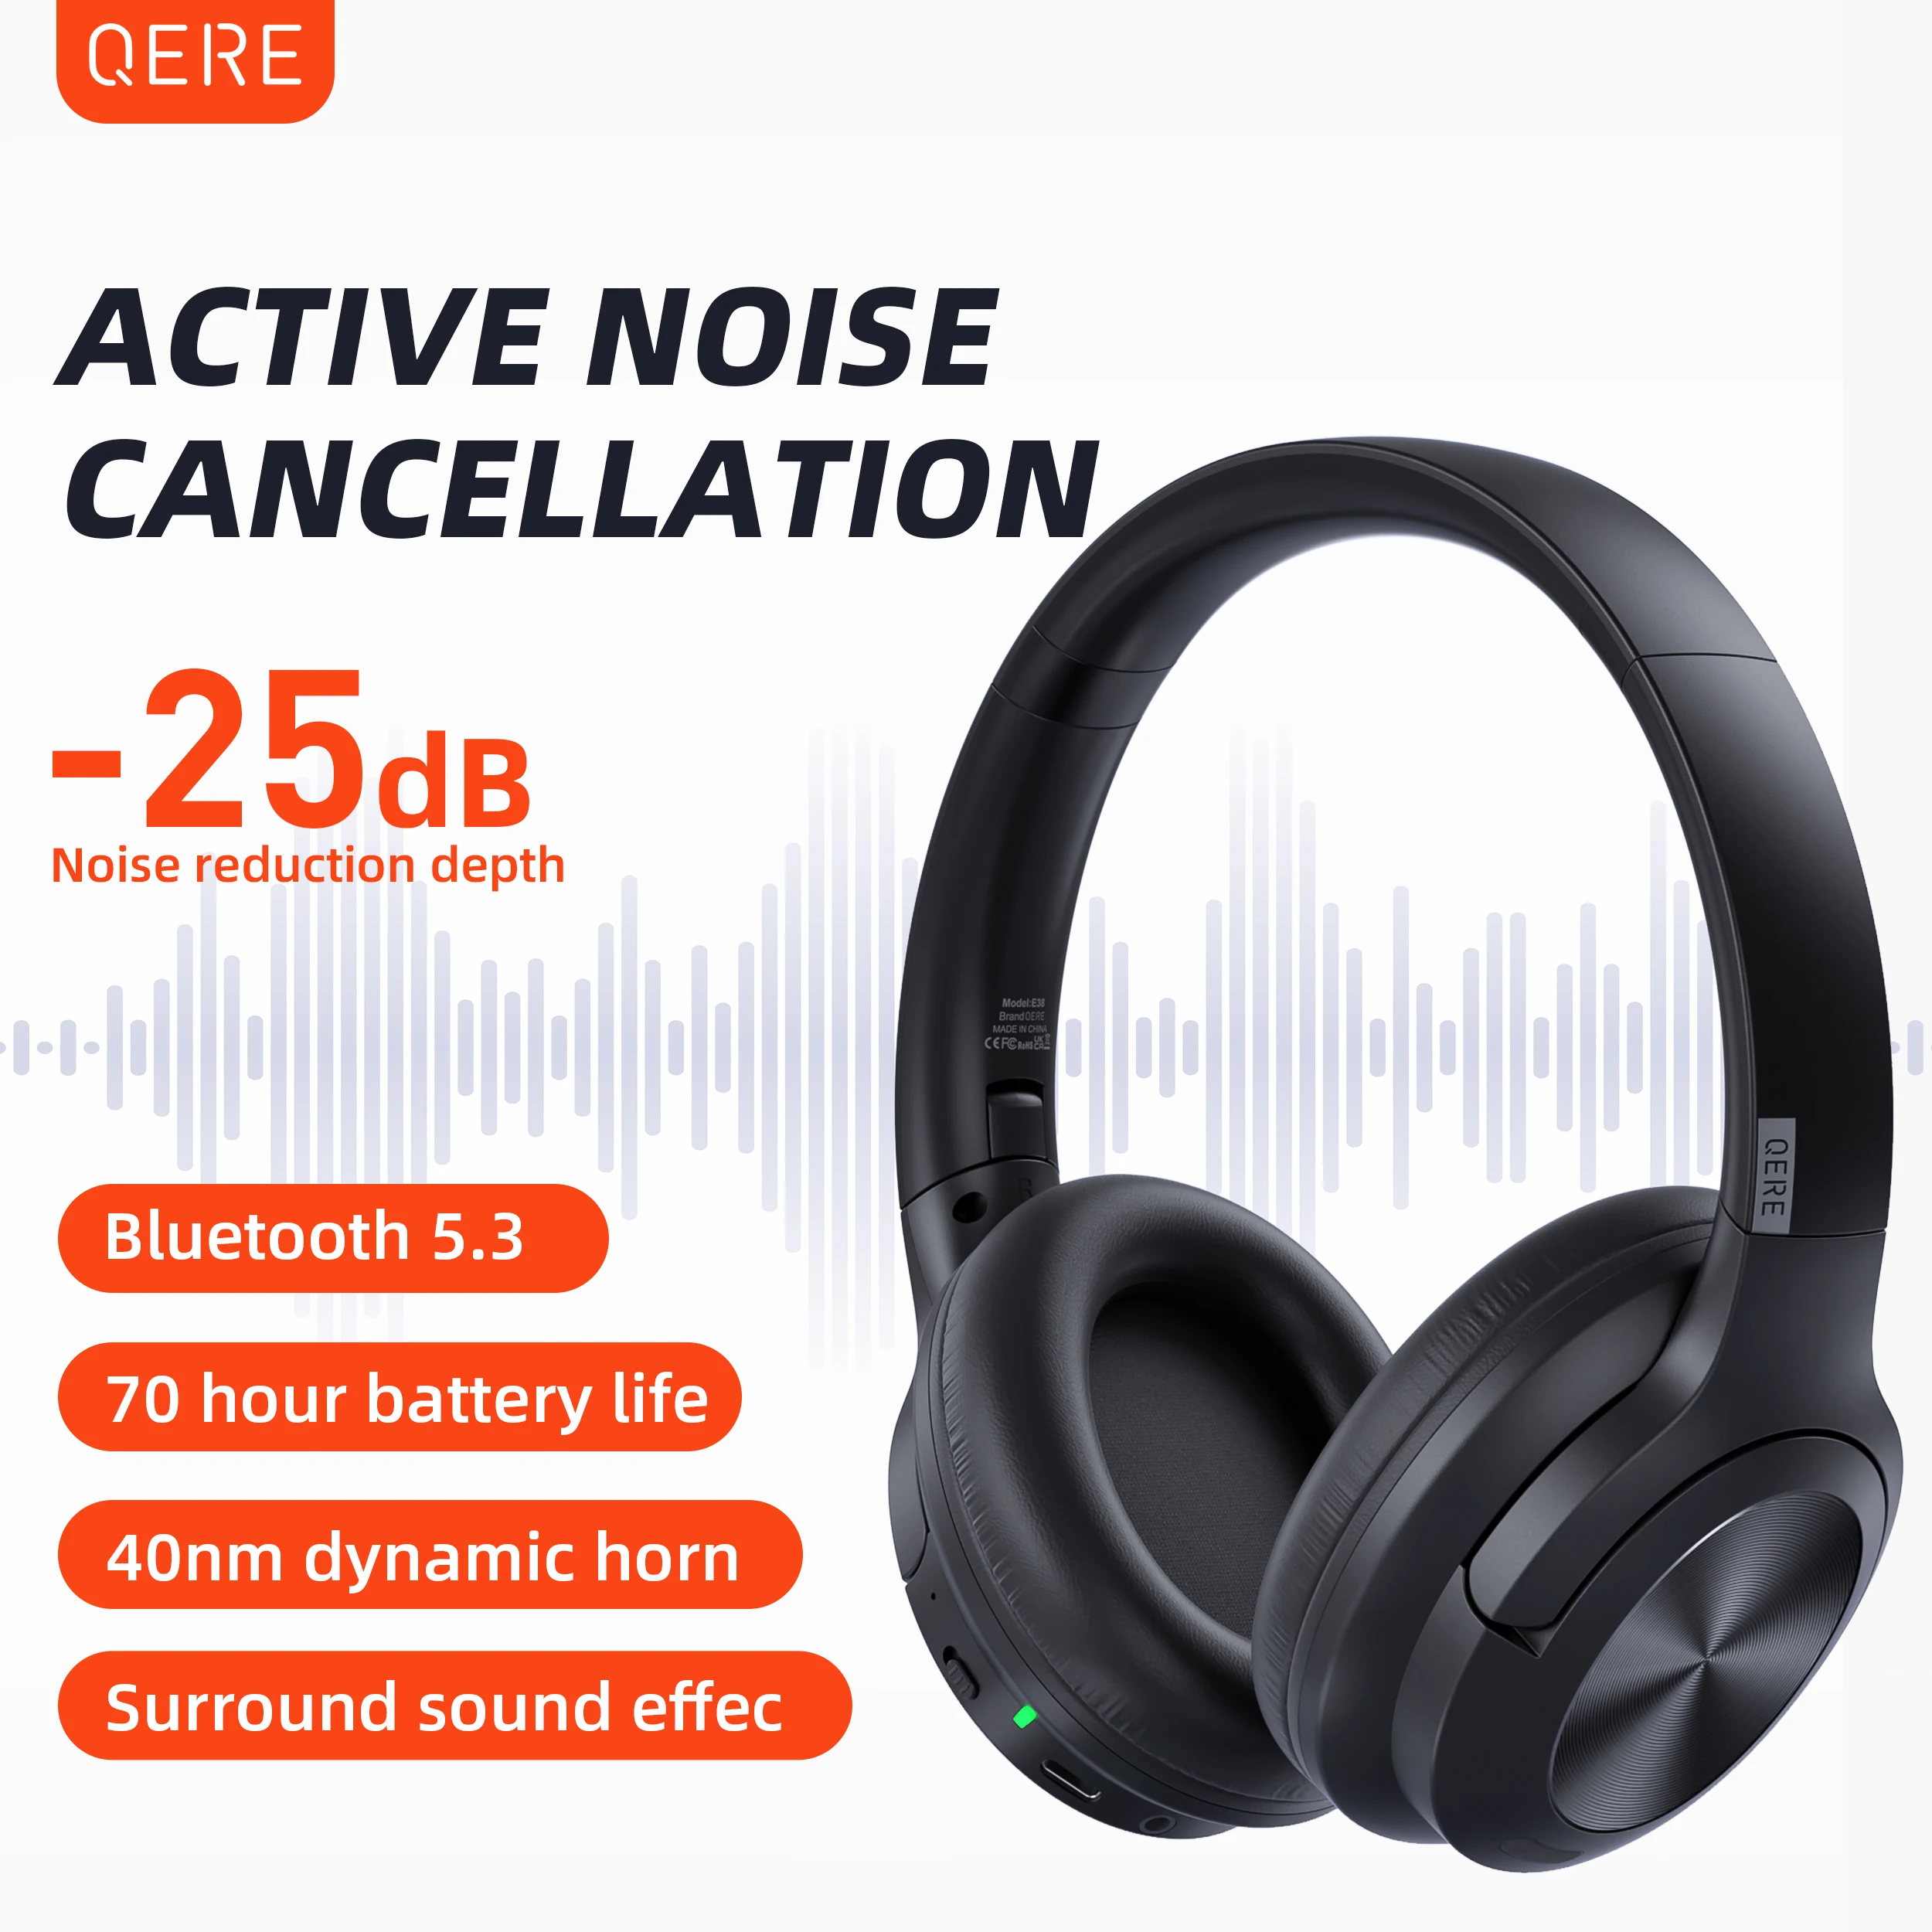 Wireless headphones QERE E80 Earphone bluetooth 5.3 ANC Noise Cancellation Hi-Res Audio Over the Ear Headset 70H 40mm Driver2.4G